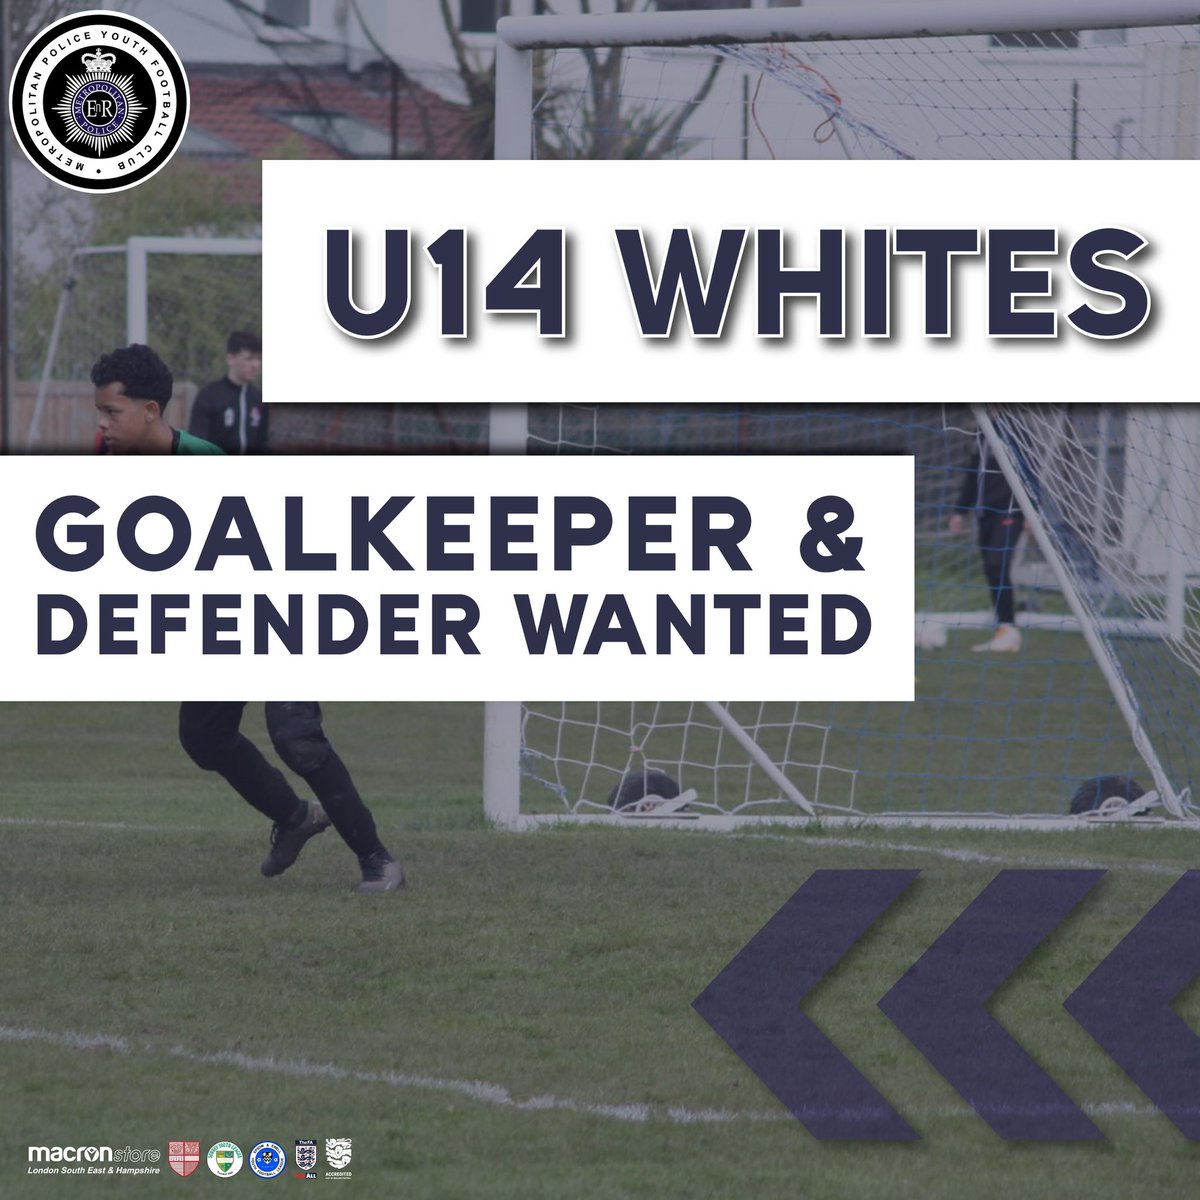 🔹Players Wanted🔹 __ Our U14 Whites are looking for a goalkeeper and defender of a good standard to join their team! __ The team play in the championship of the Surrey Youth League on Sundays and train on Thursdays, 6pm - 7pm at Tolworth Goals⚽️ __ Contact lness@mpyfc.co.uk